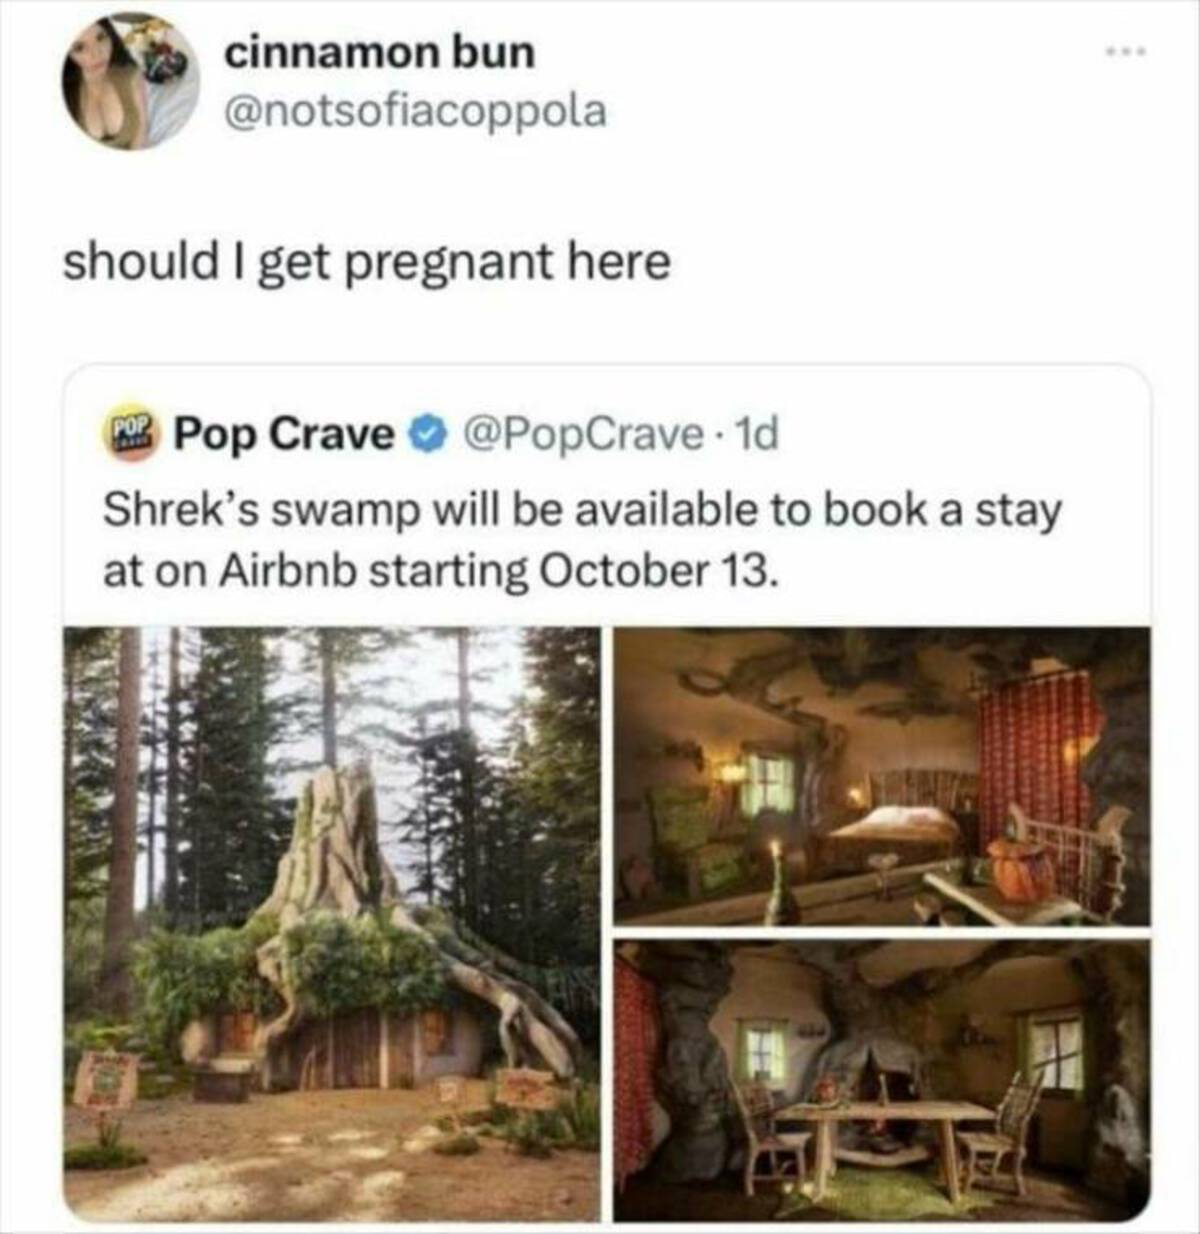 shrek's swamp airbnb - cinnamon bun should I get pregnant here Pop Pop Crave . 1d Shrek's swamp will be available to book a stay at on Airbnb starting October 13.